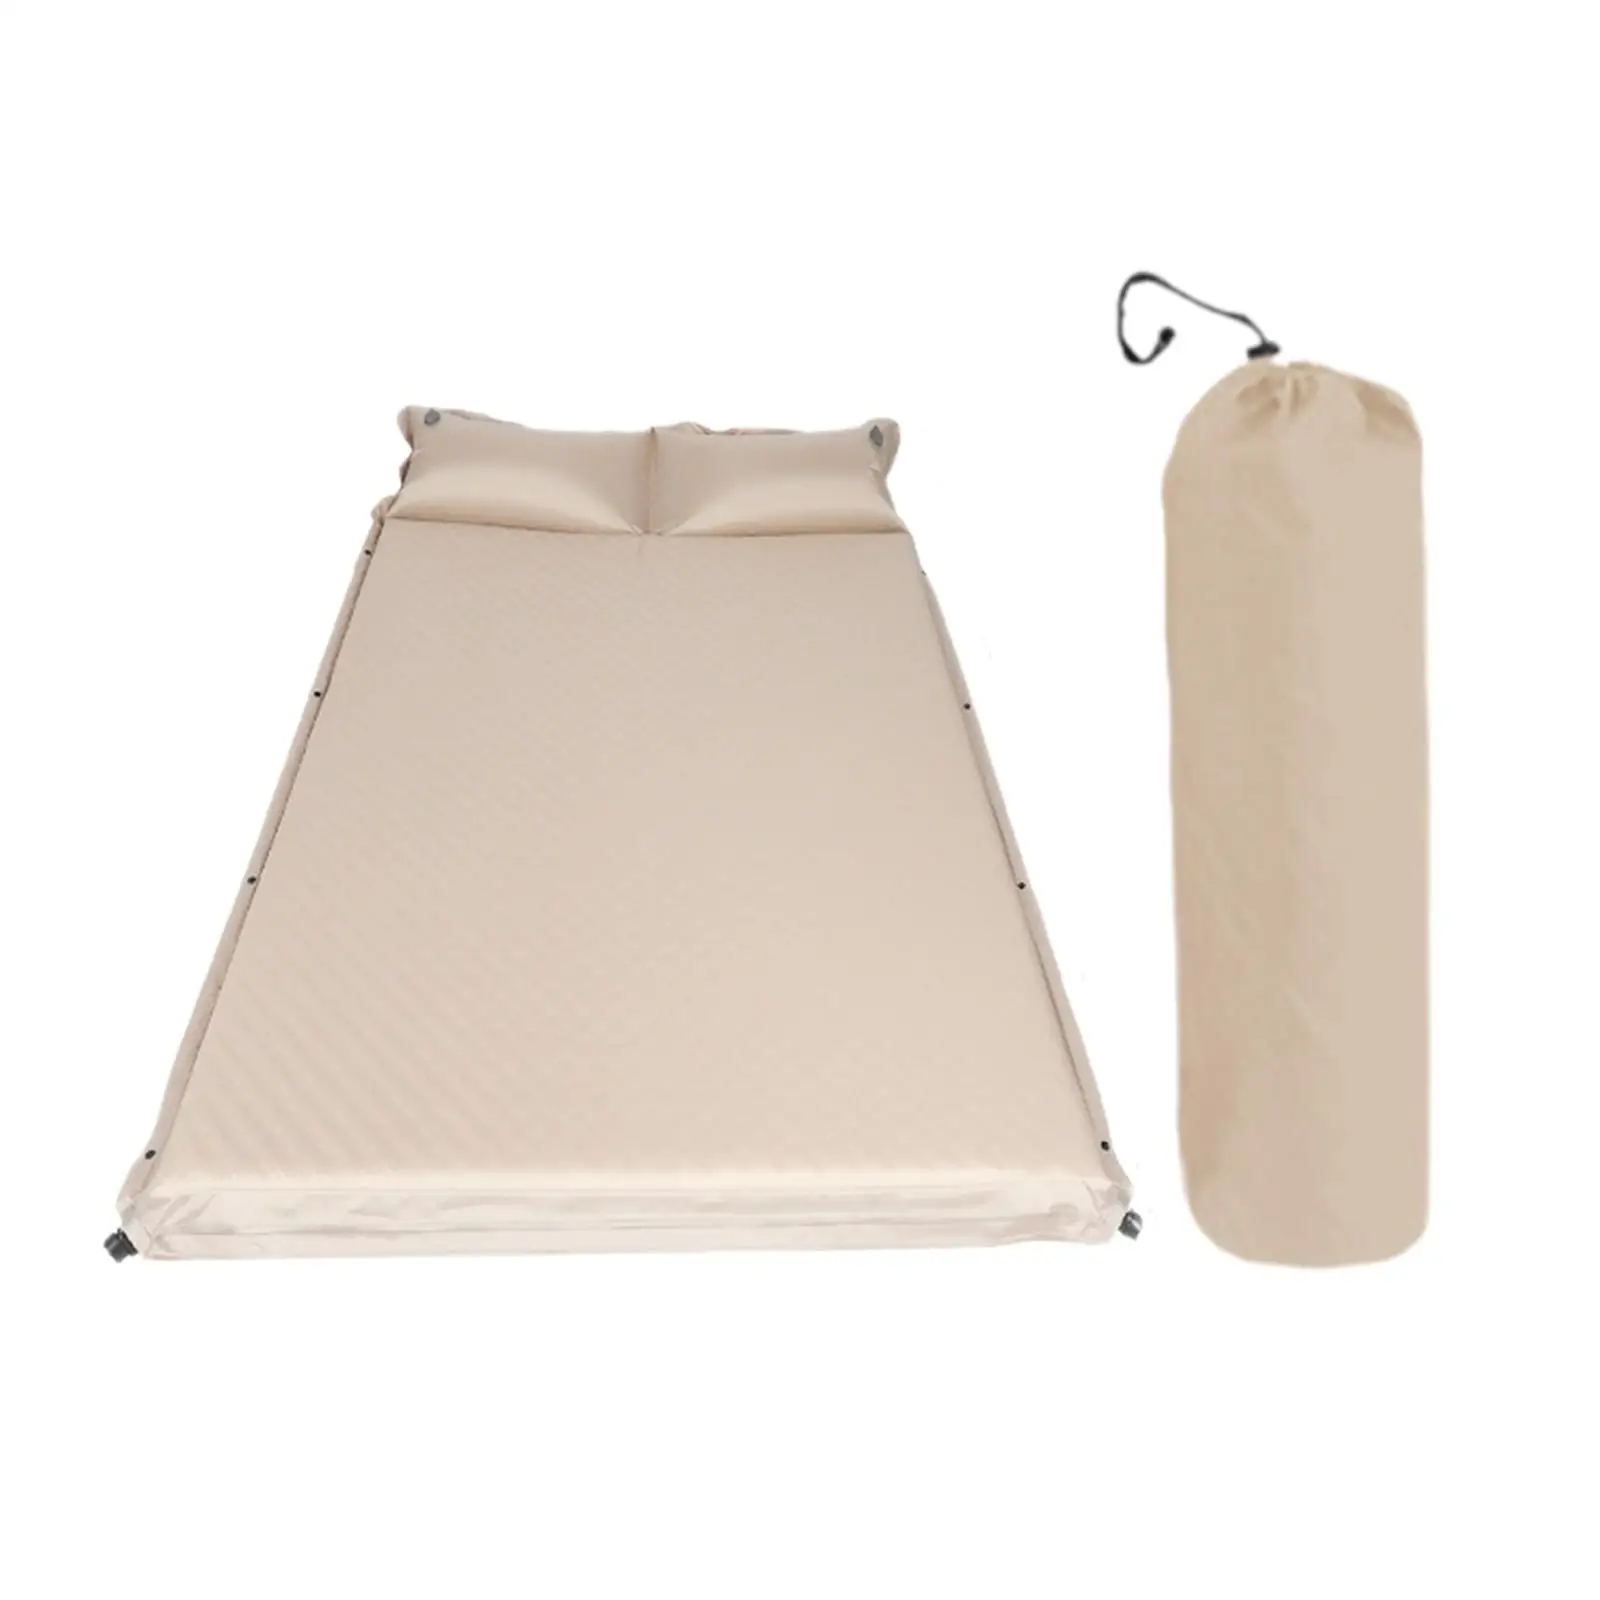 Automatic Inflatable Mattress Camping Sleeping Pad with Pillow Inflatable Bed